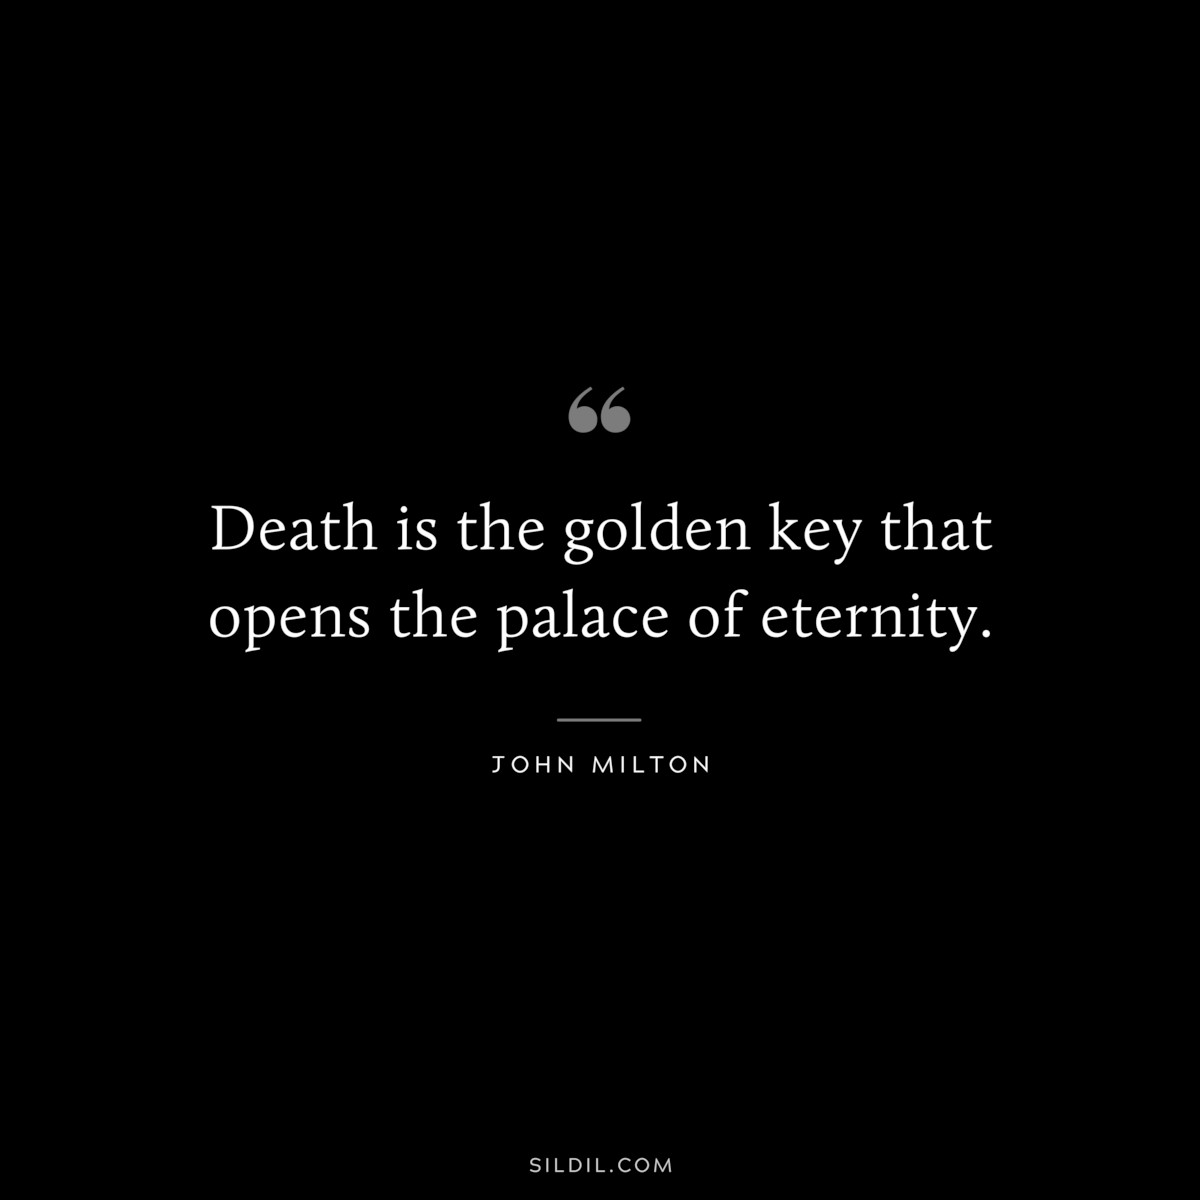 Death is the golden key that opens the palace of eternity. ― John Milton